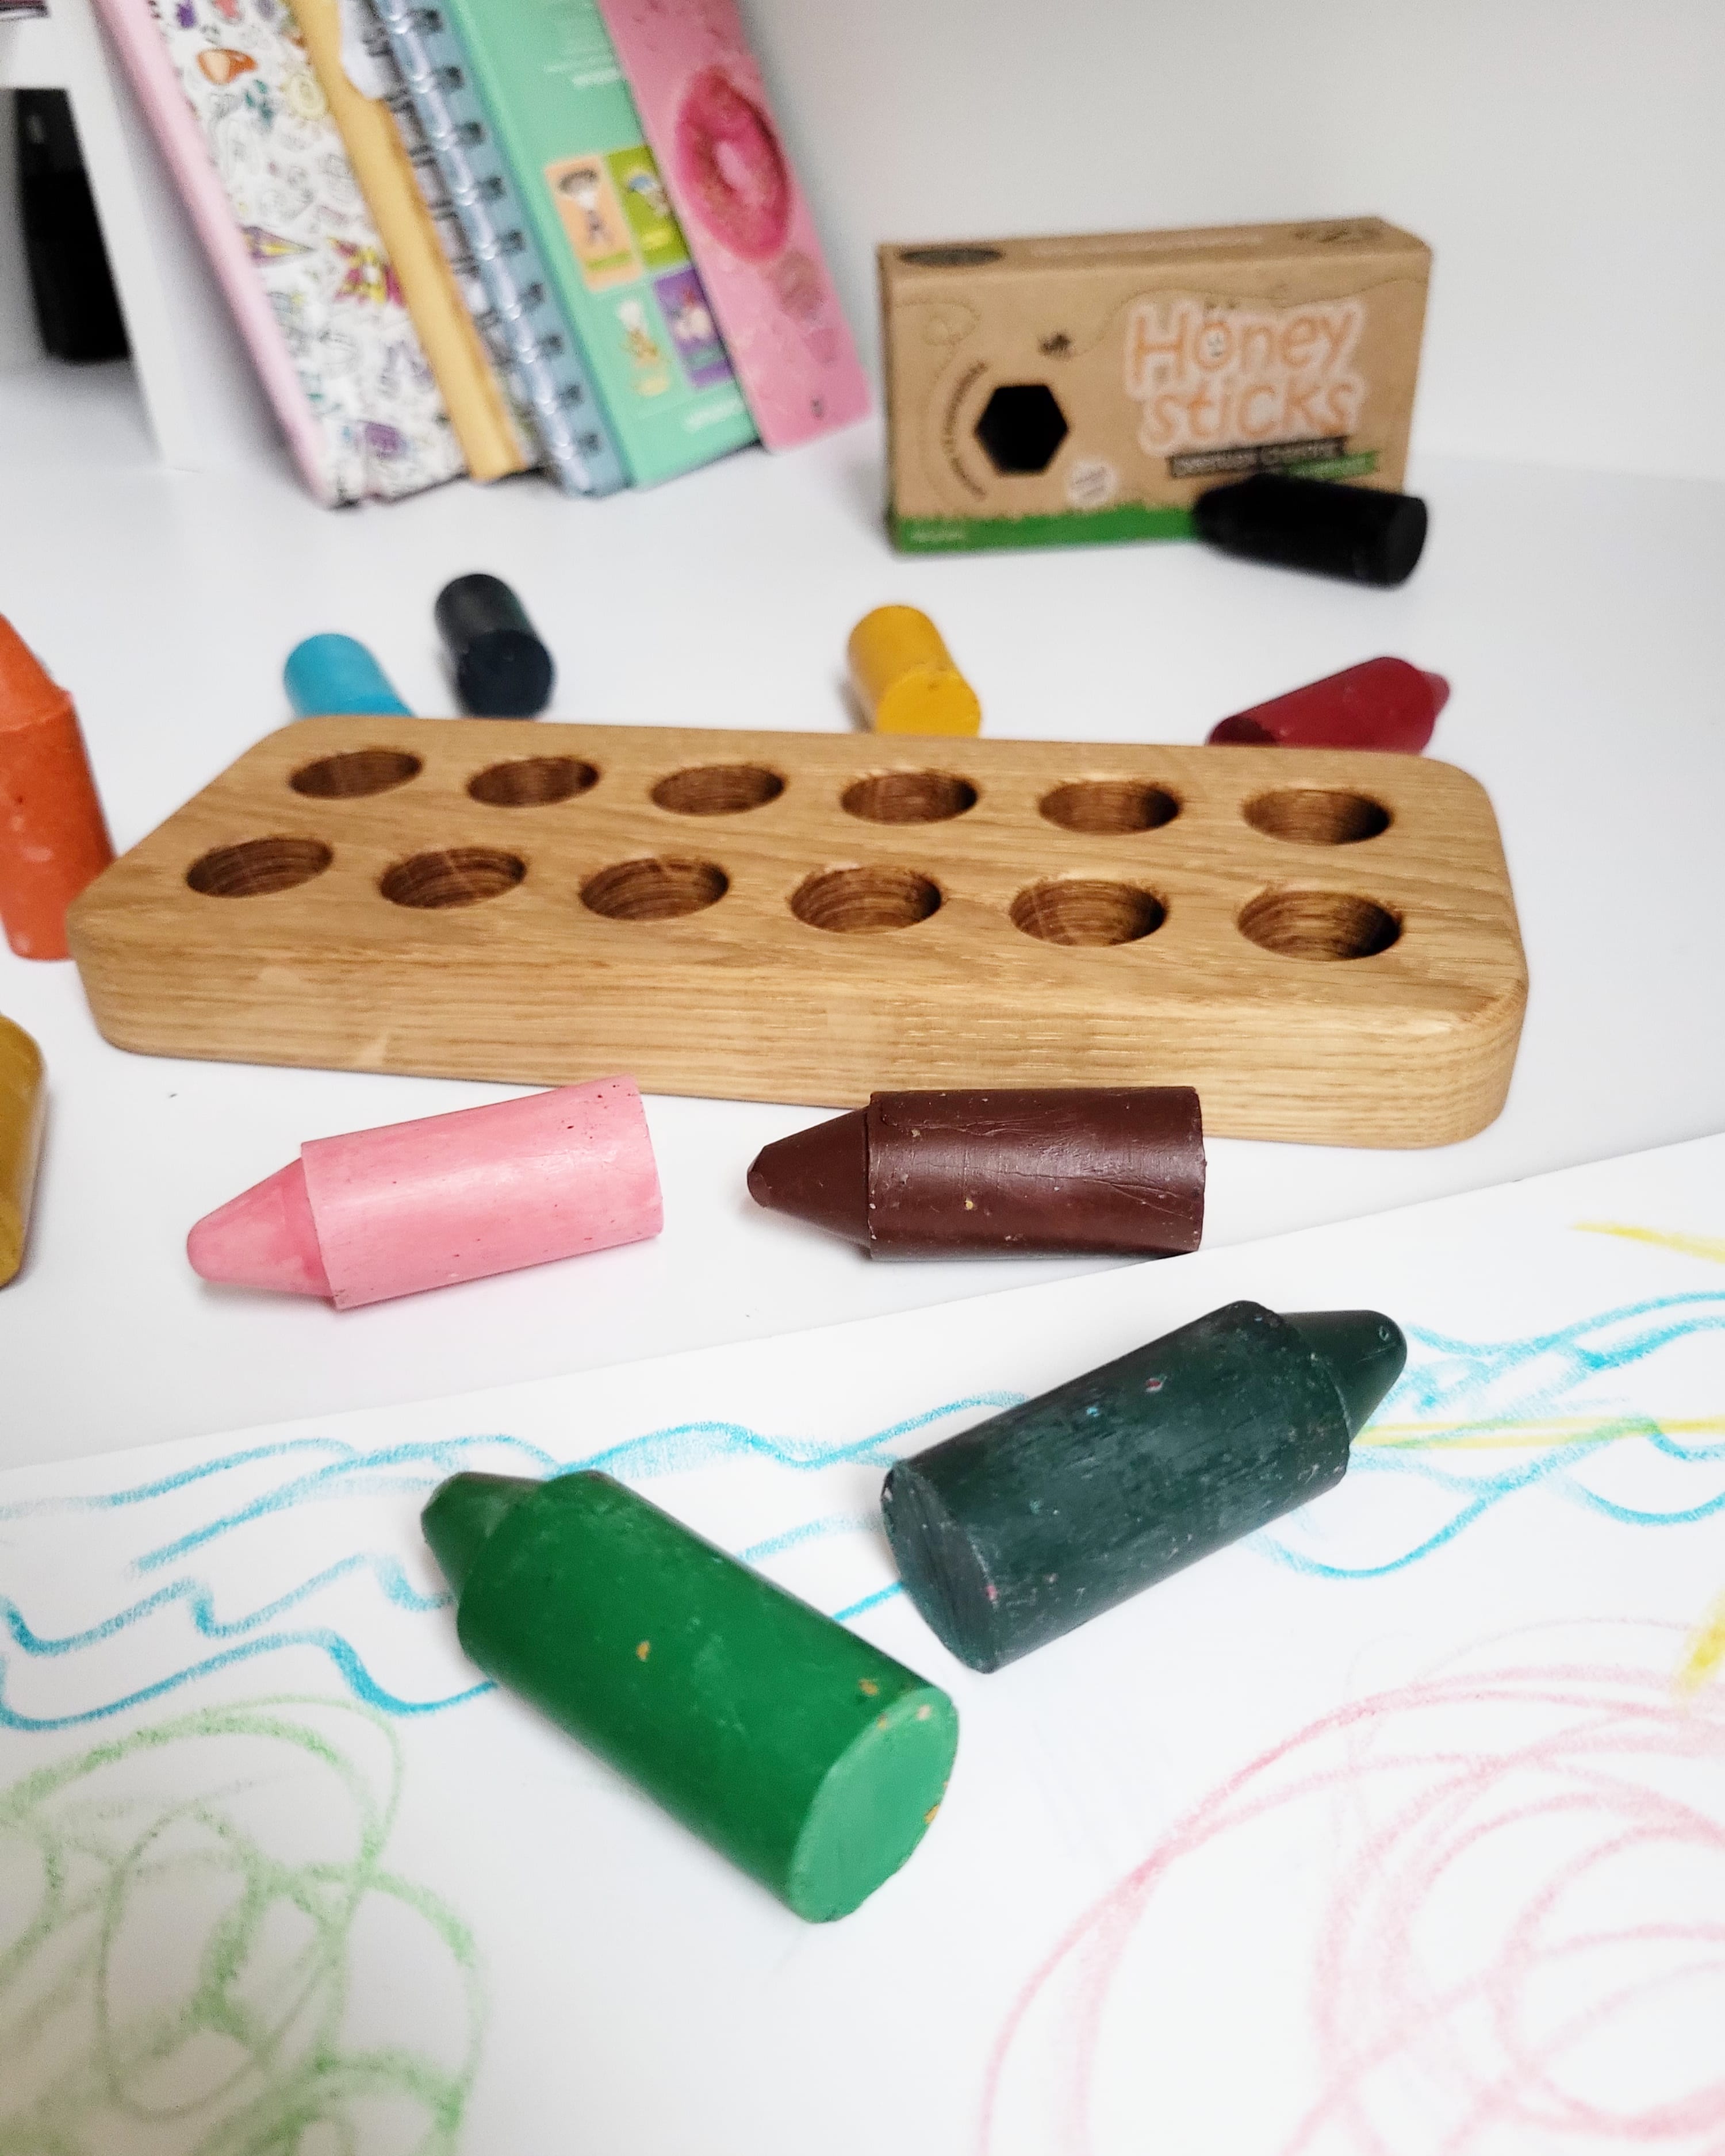 Crayon holder for 12 Honey Sticks crayons, without crayons